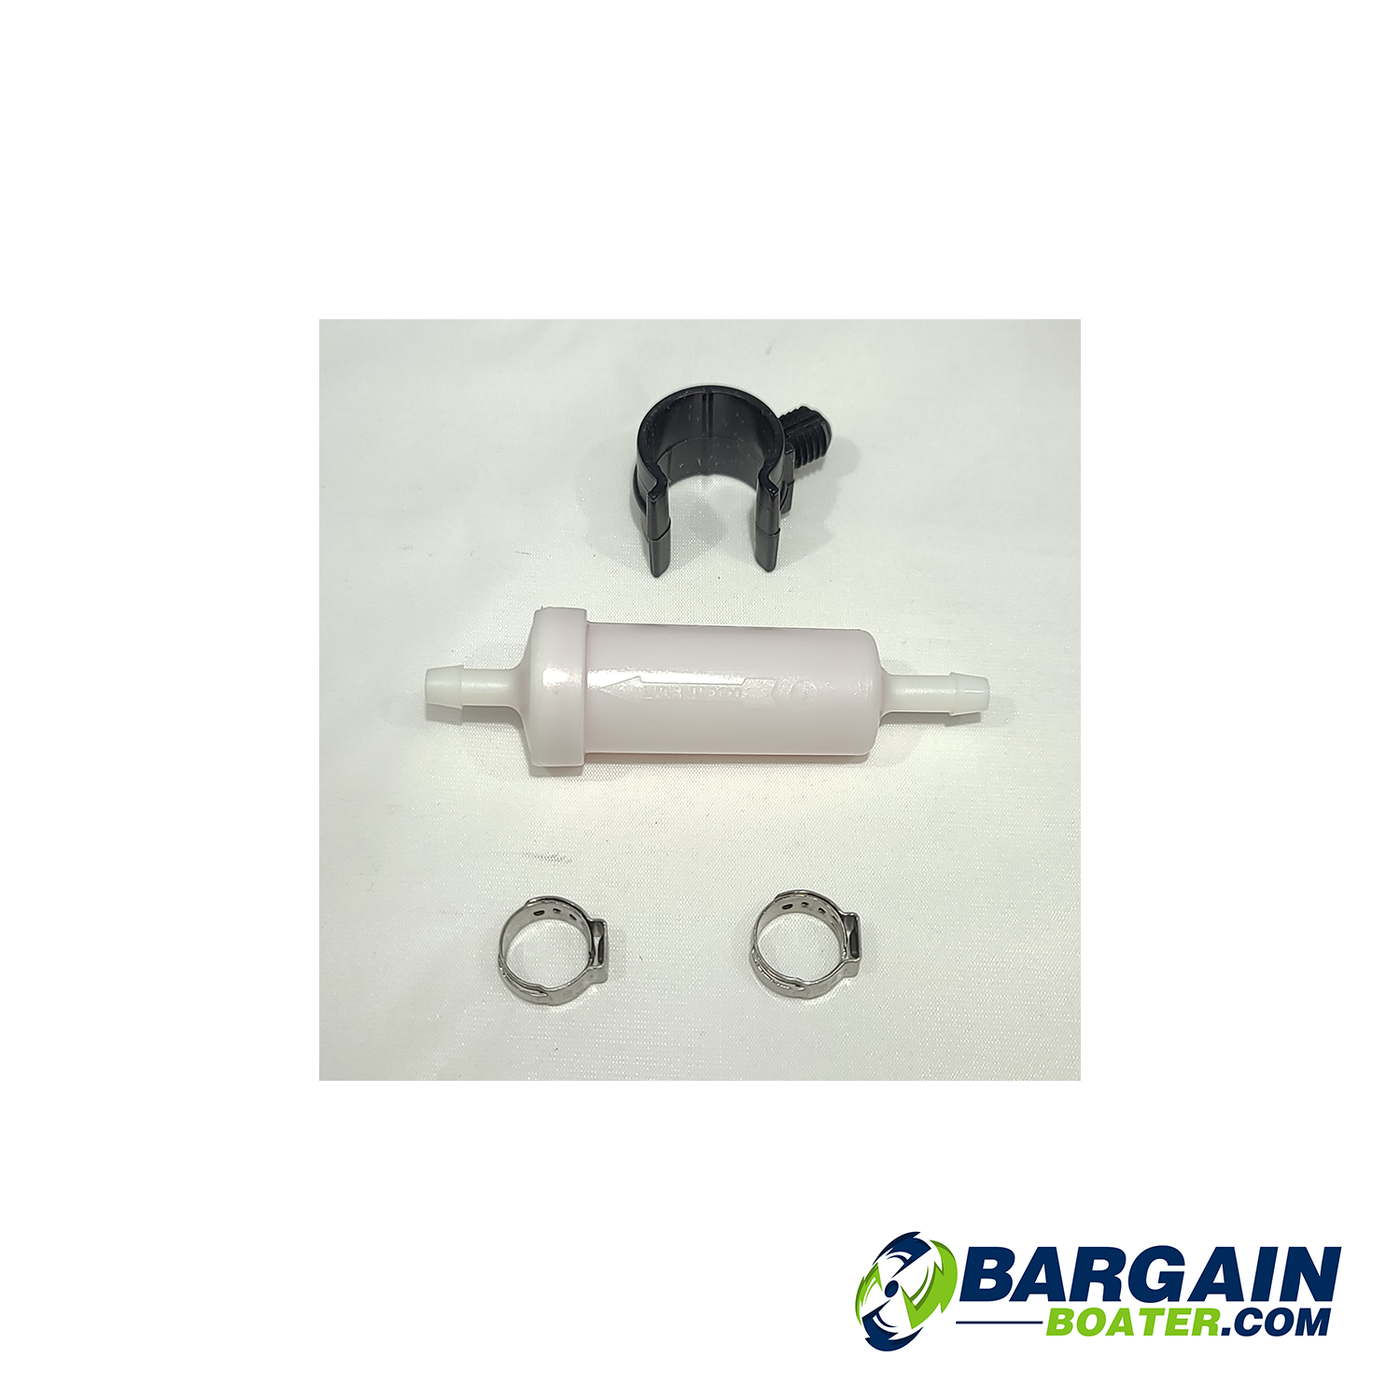 This is an OEM Evinrude/Johnson Oil Filter Kit, Part Number 5011891 is the genuine replacement needed for service on Etec G2 model outboard motors. This is a must replace item for the 5 Year / 500 Hour service. The kit comes with the oil filter, two Oetiker clamps, and a filter holder. This supersedes from part number 5010769